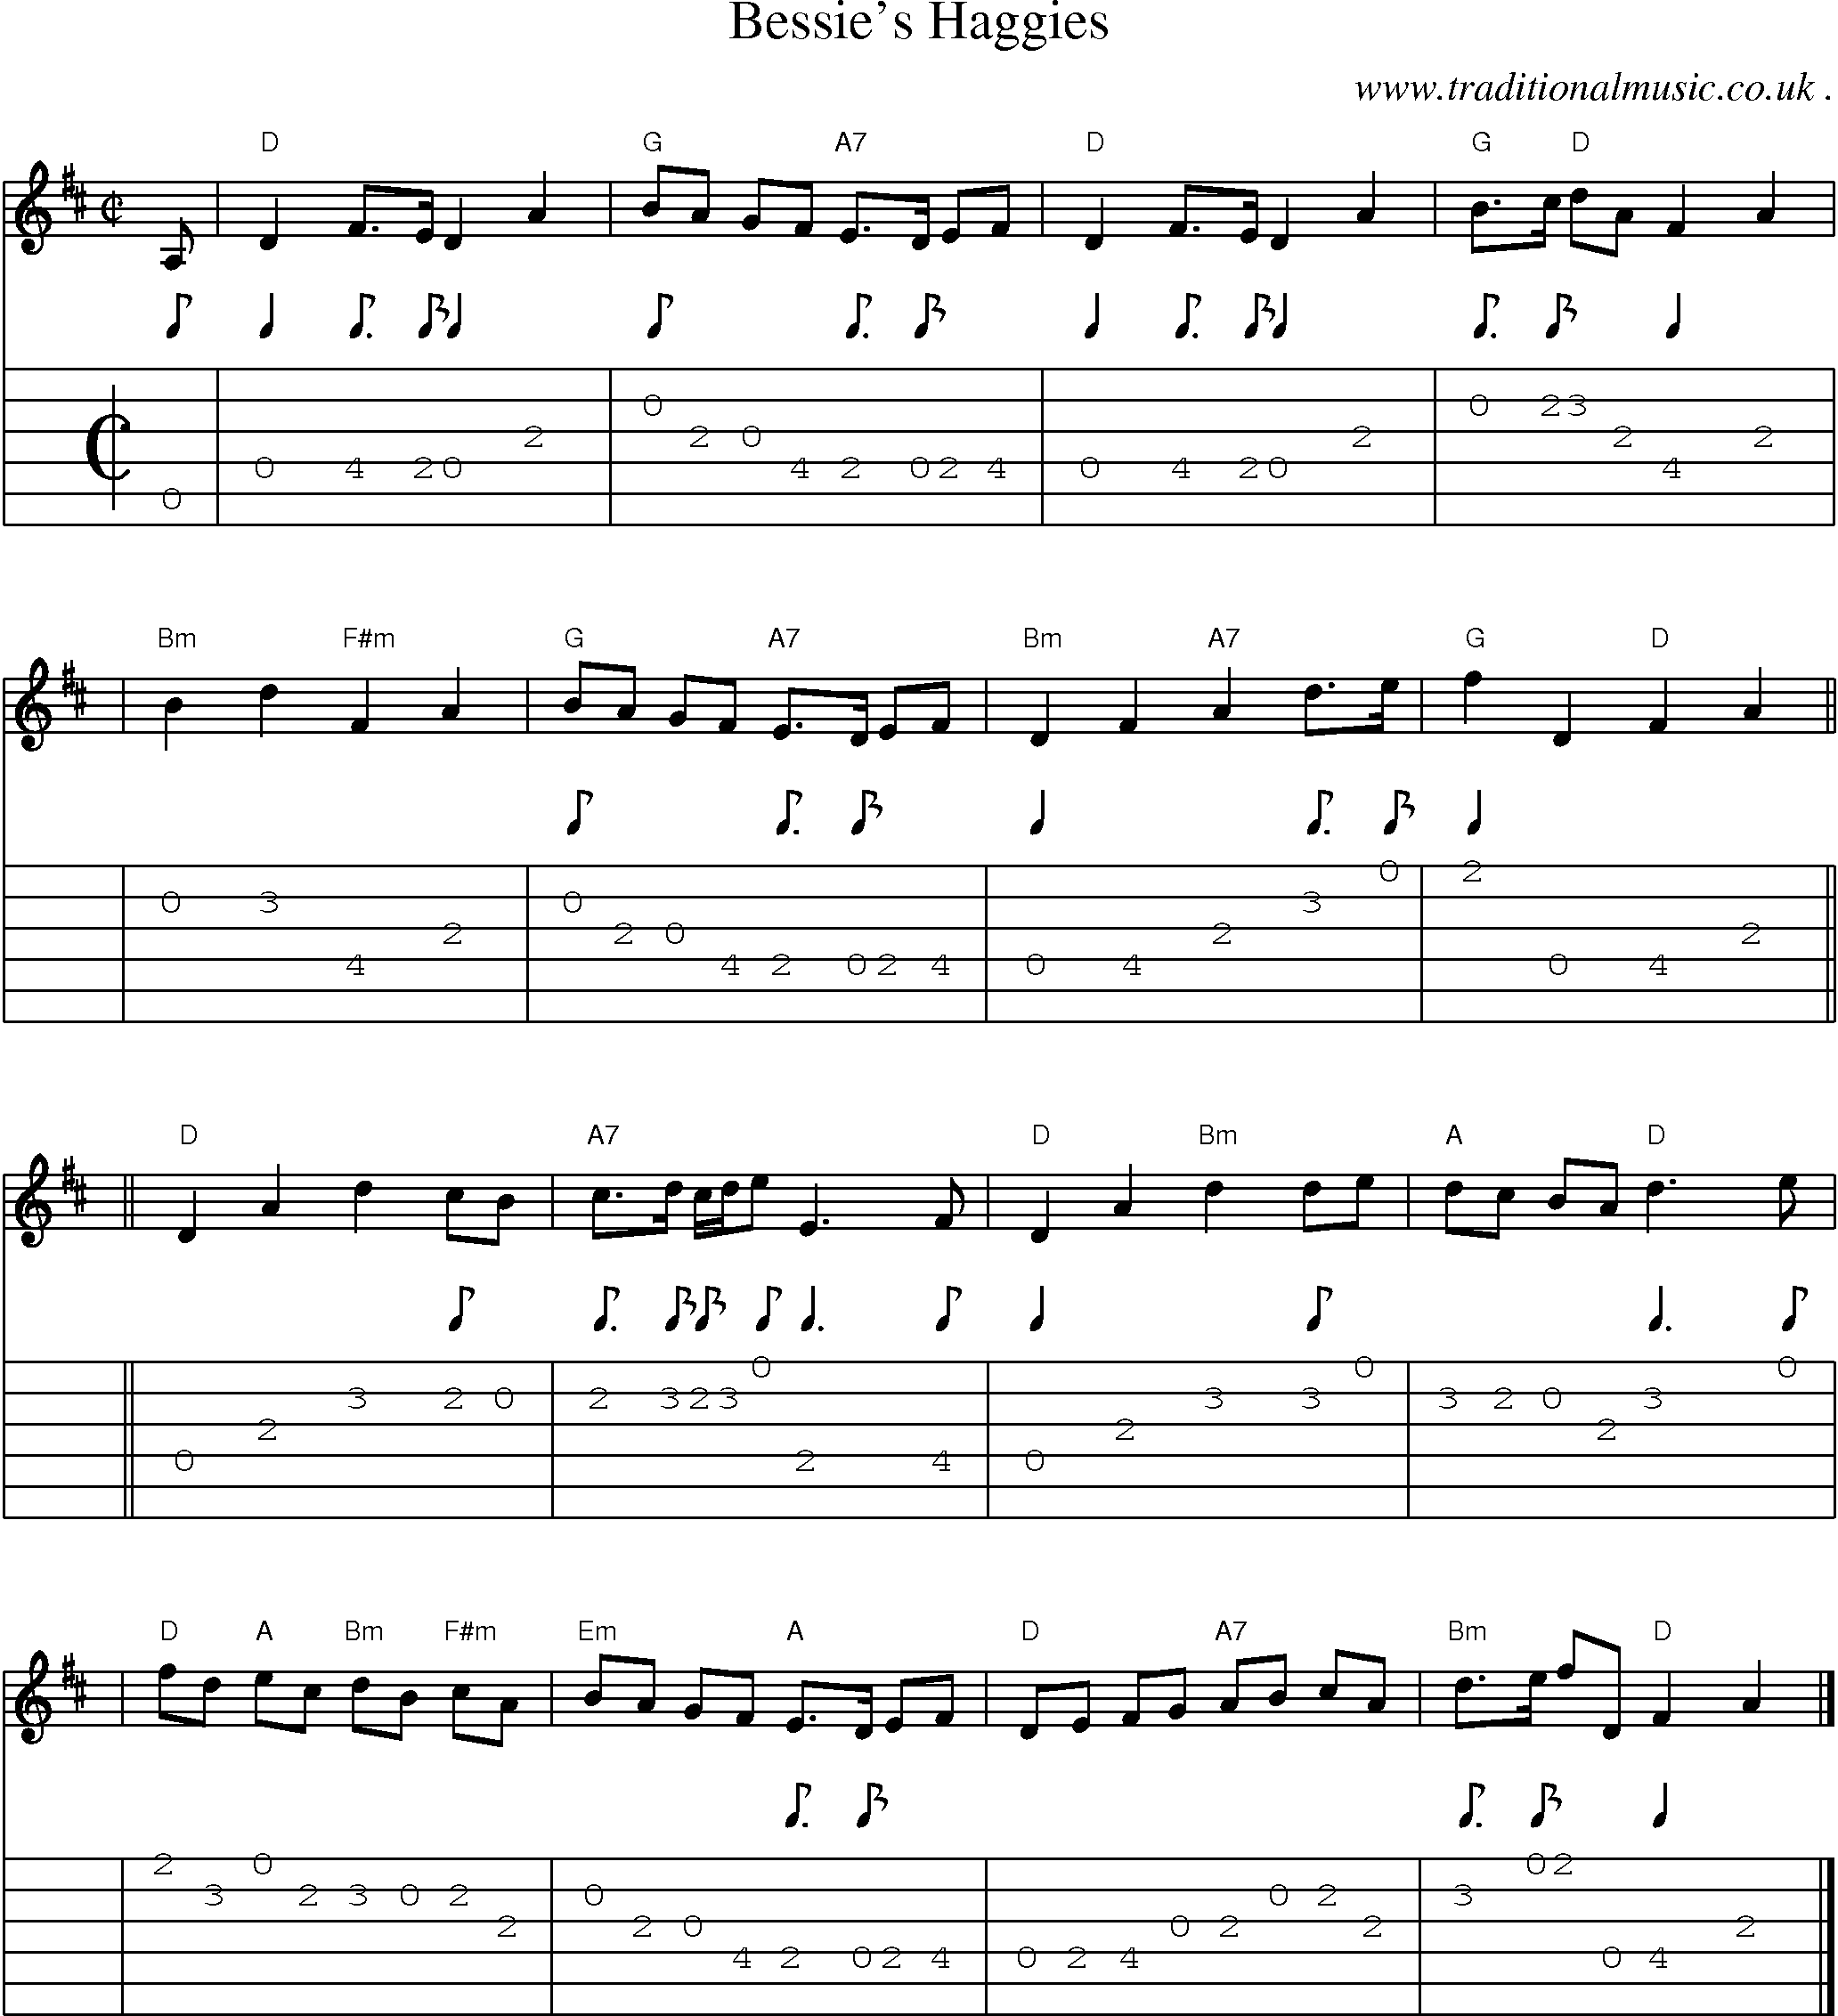 Sheet-music  score, Chords and Guitar Tabs for Bessies Haggies